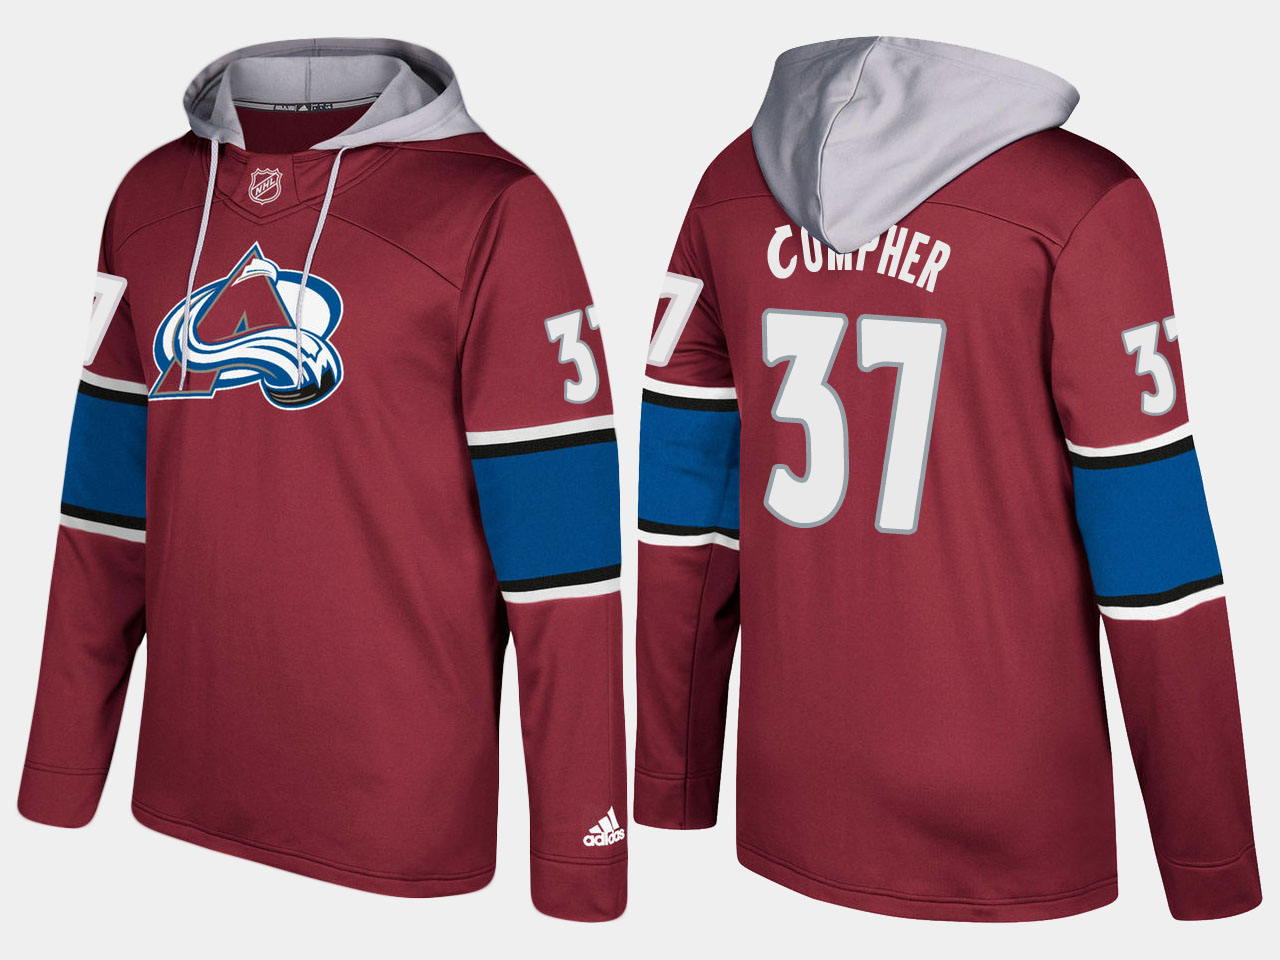 Nike Avalanche 37 J.T. Compher Name And Number Burgundy Hoodie